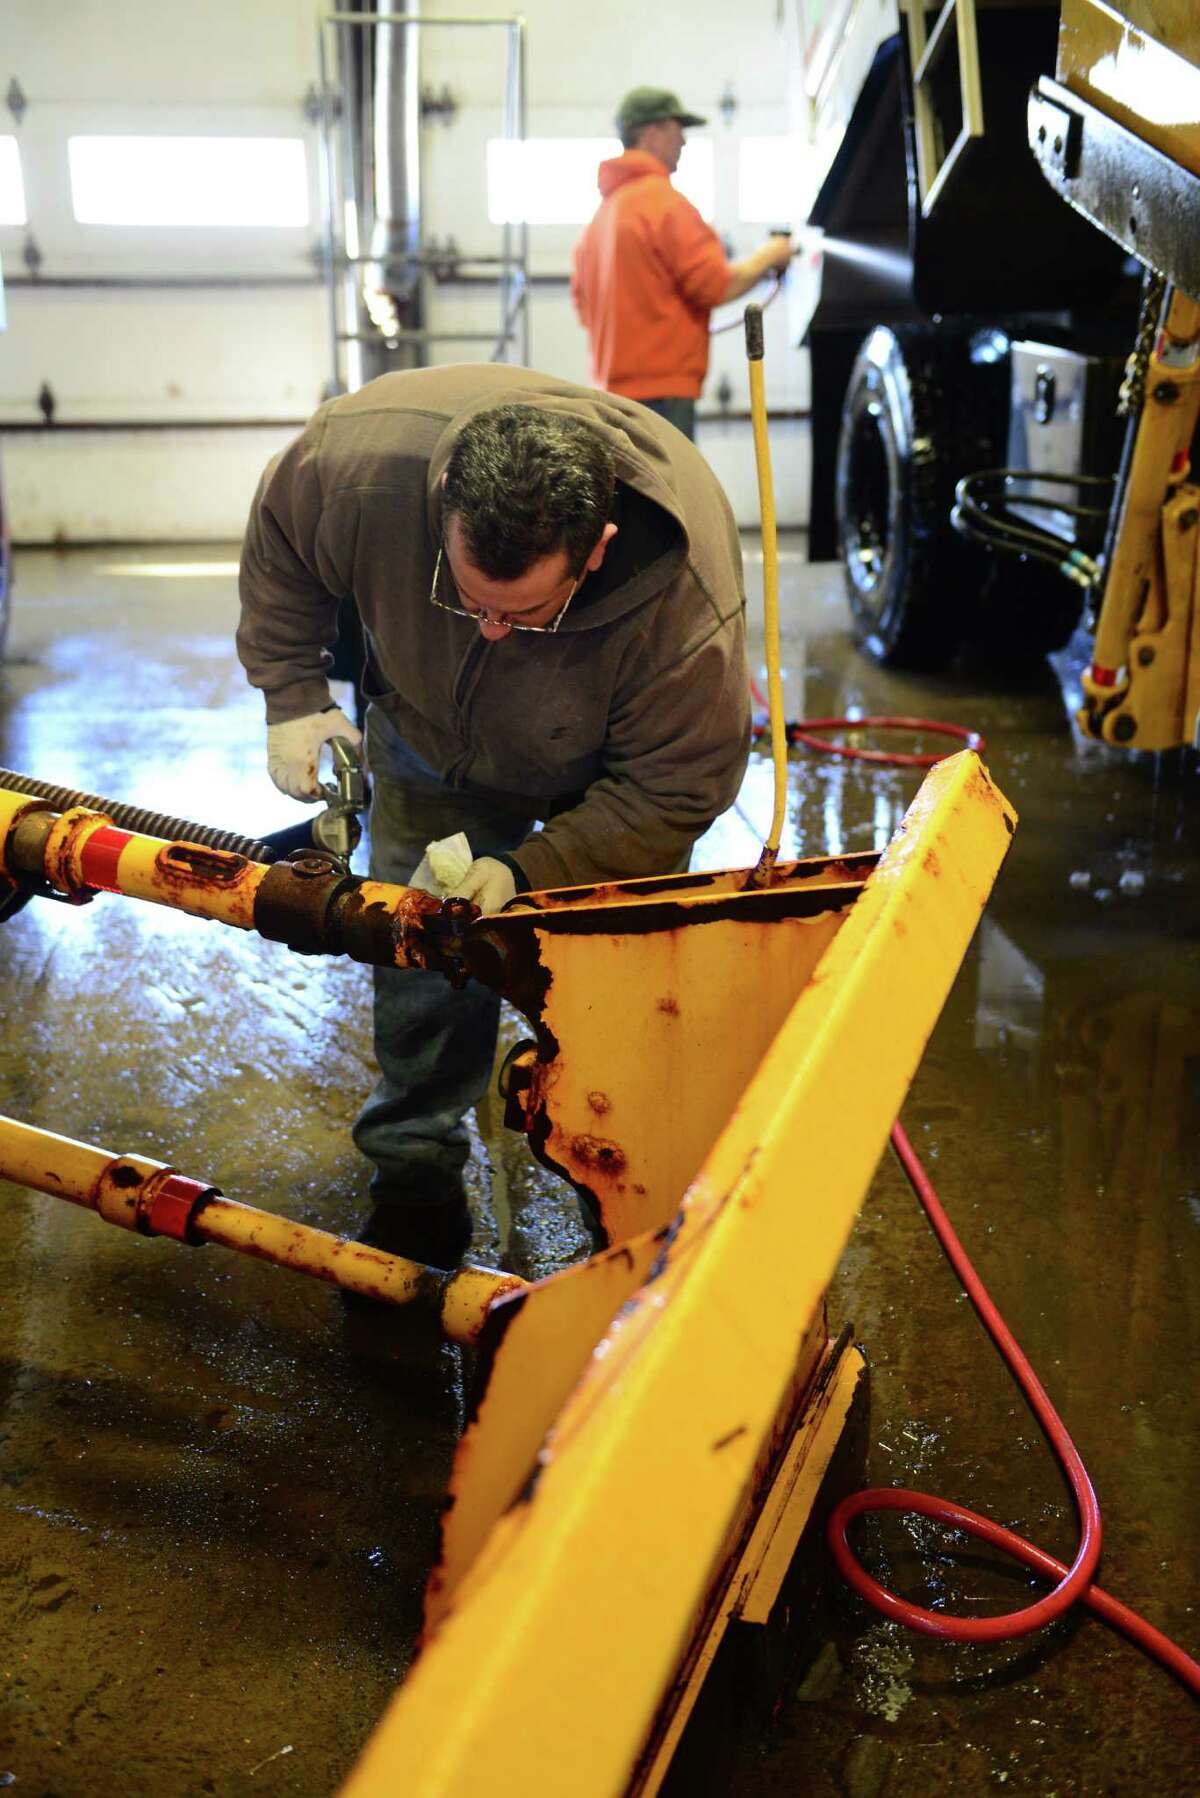 New York State Department of Transportation highway maintenance workers Michael Casso, left, and Robert Cocca, right, prepare their snowplows for duty Wednesday afternoon, Feb. 12, 2014, at the state DOT garage on Watervliet Shaker Rd in Colonie, N.Y. DOT crews are getting ready for Thursday's expected snowstorm. The snowplows are put through a weekly maintenance service by the drivers. (Will Waldron/Times Union)